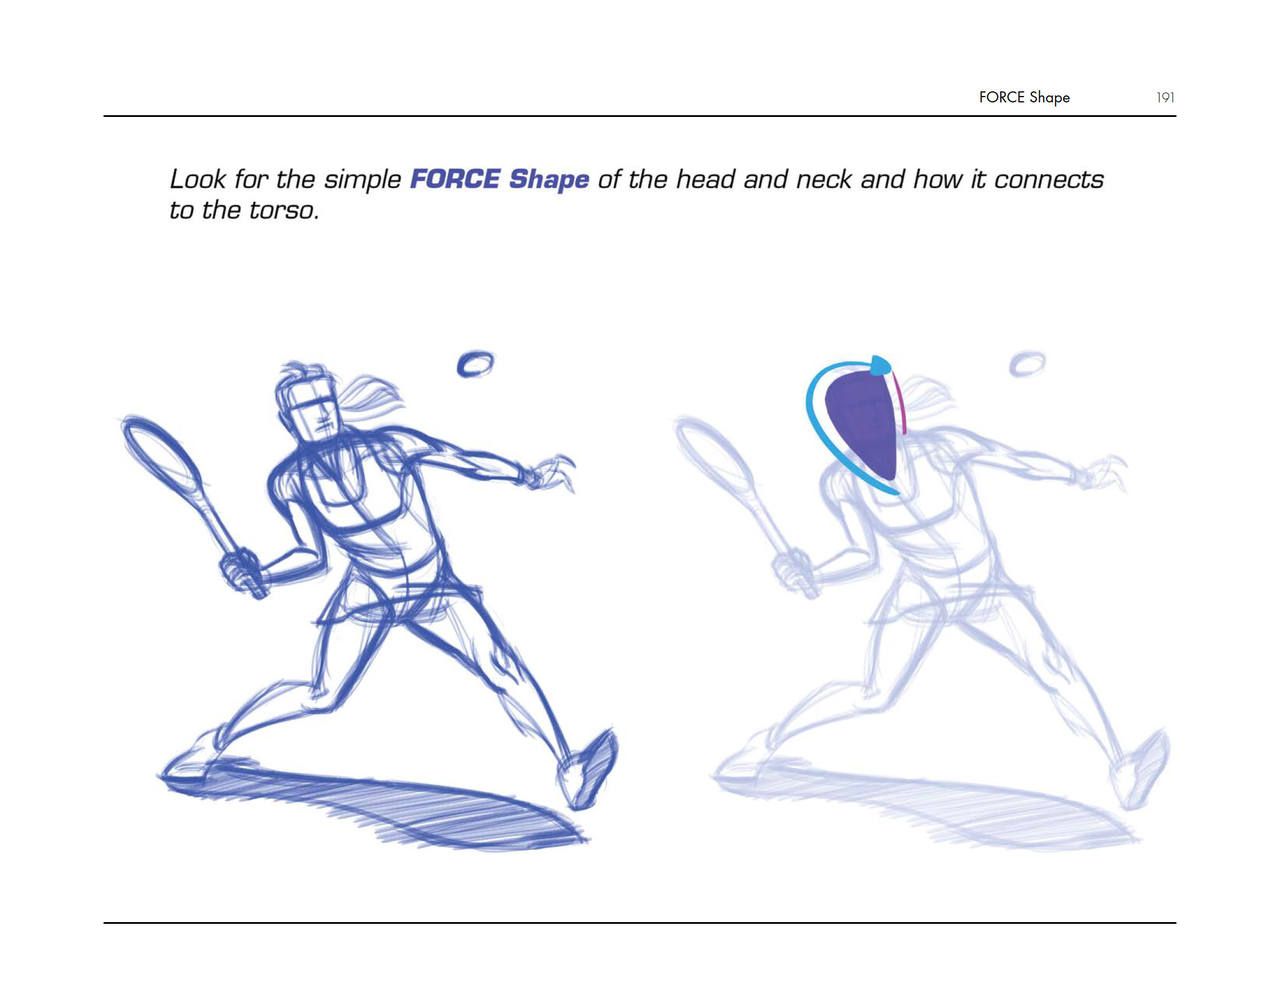 The Force companion_ quick tips and tricks-CRC Press (2019) - Michael D. Mattesi [Digital] 204